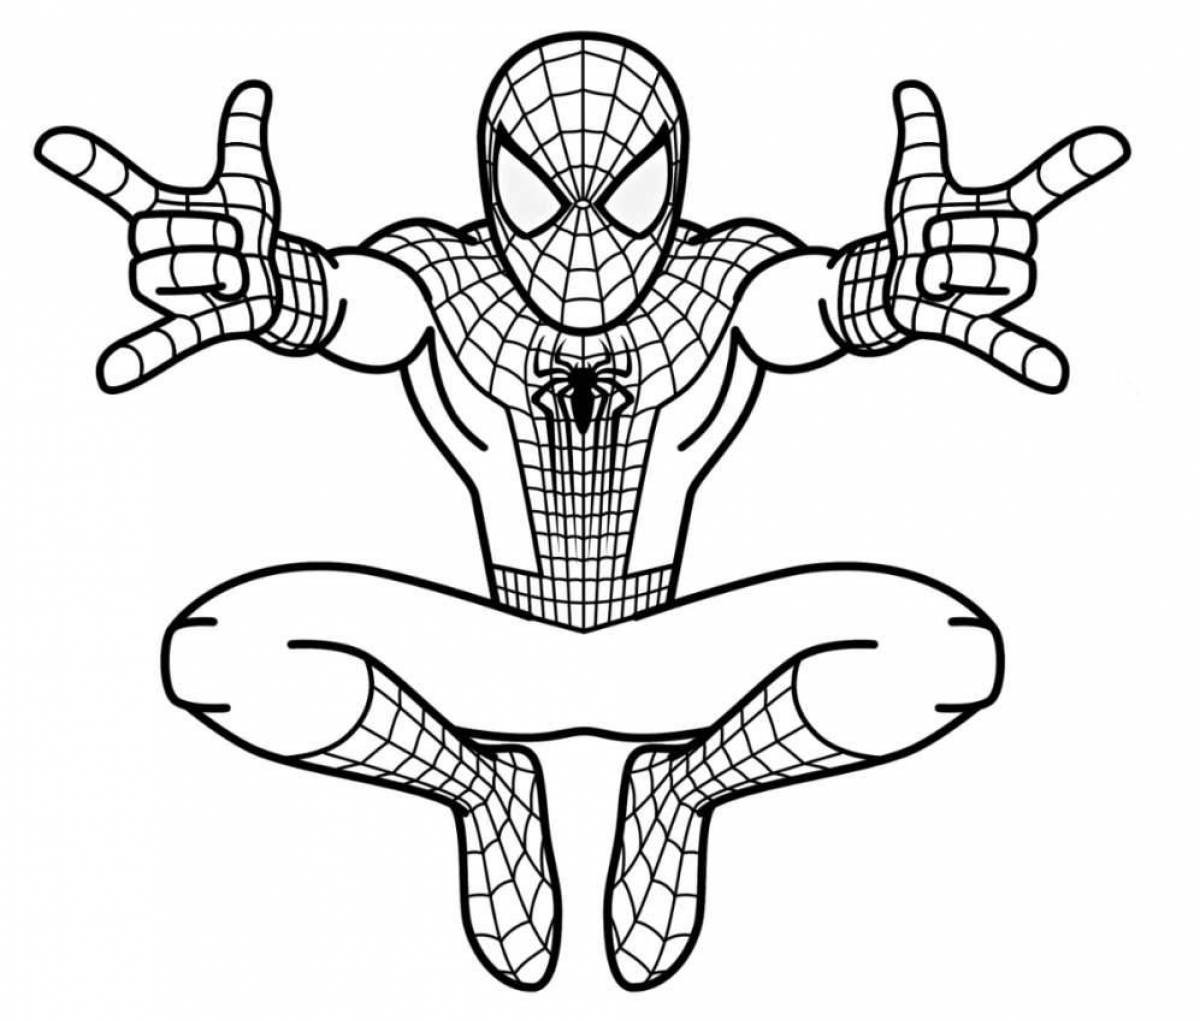 Colorful spiderman coloring page for kids